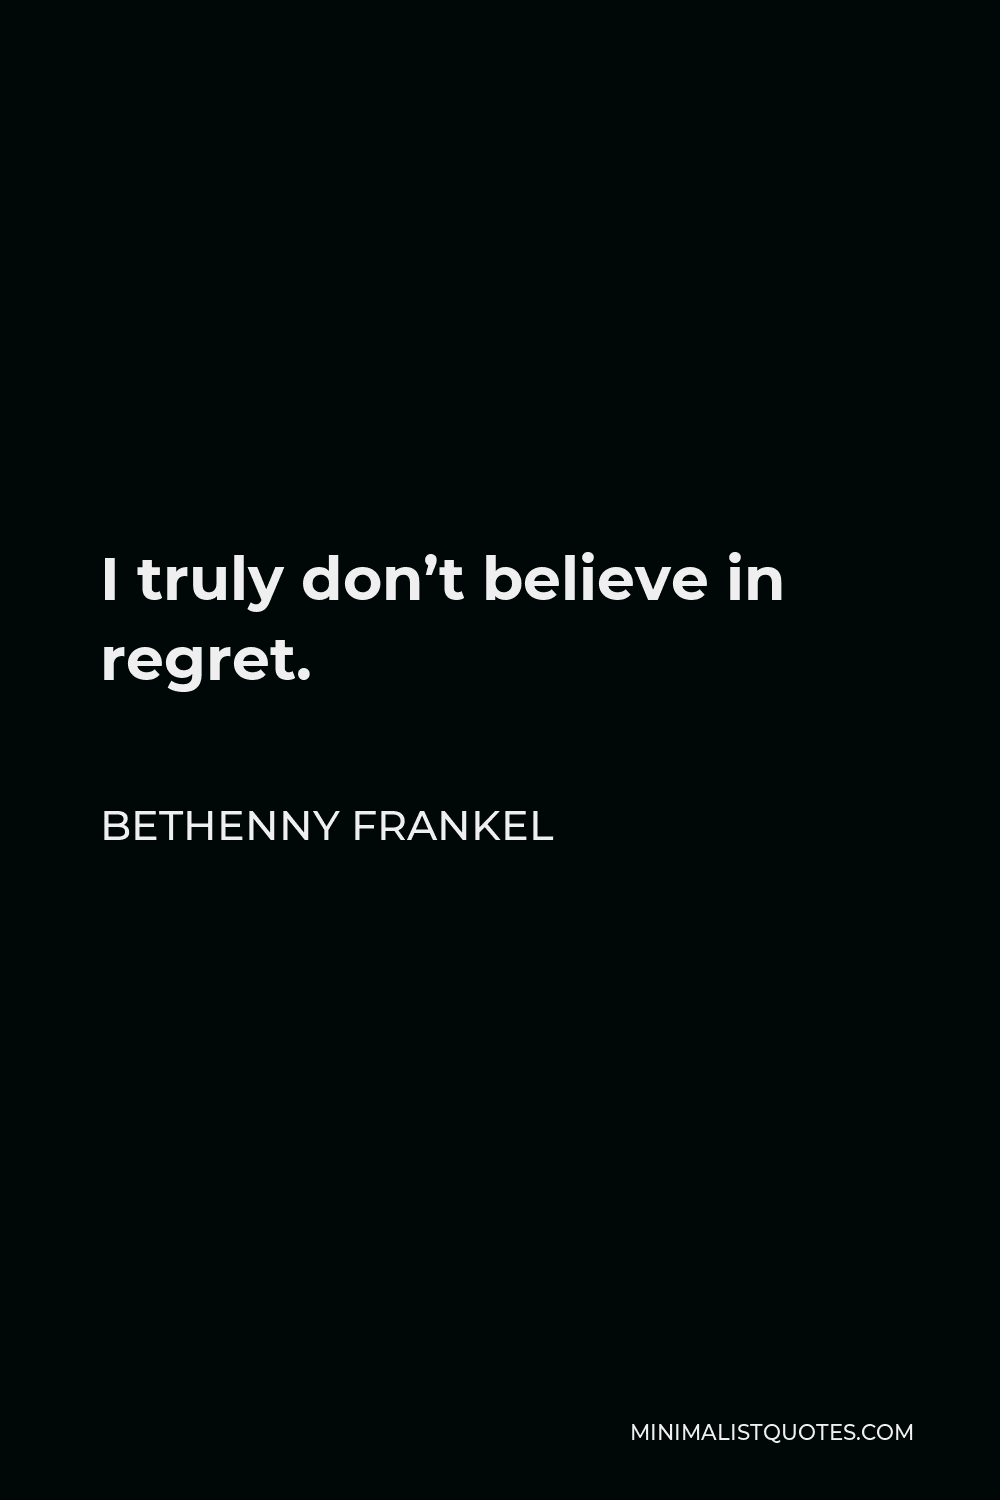 Bethenny Frankel Quote - I truly don’t believe in regret.